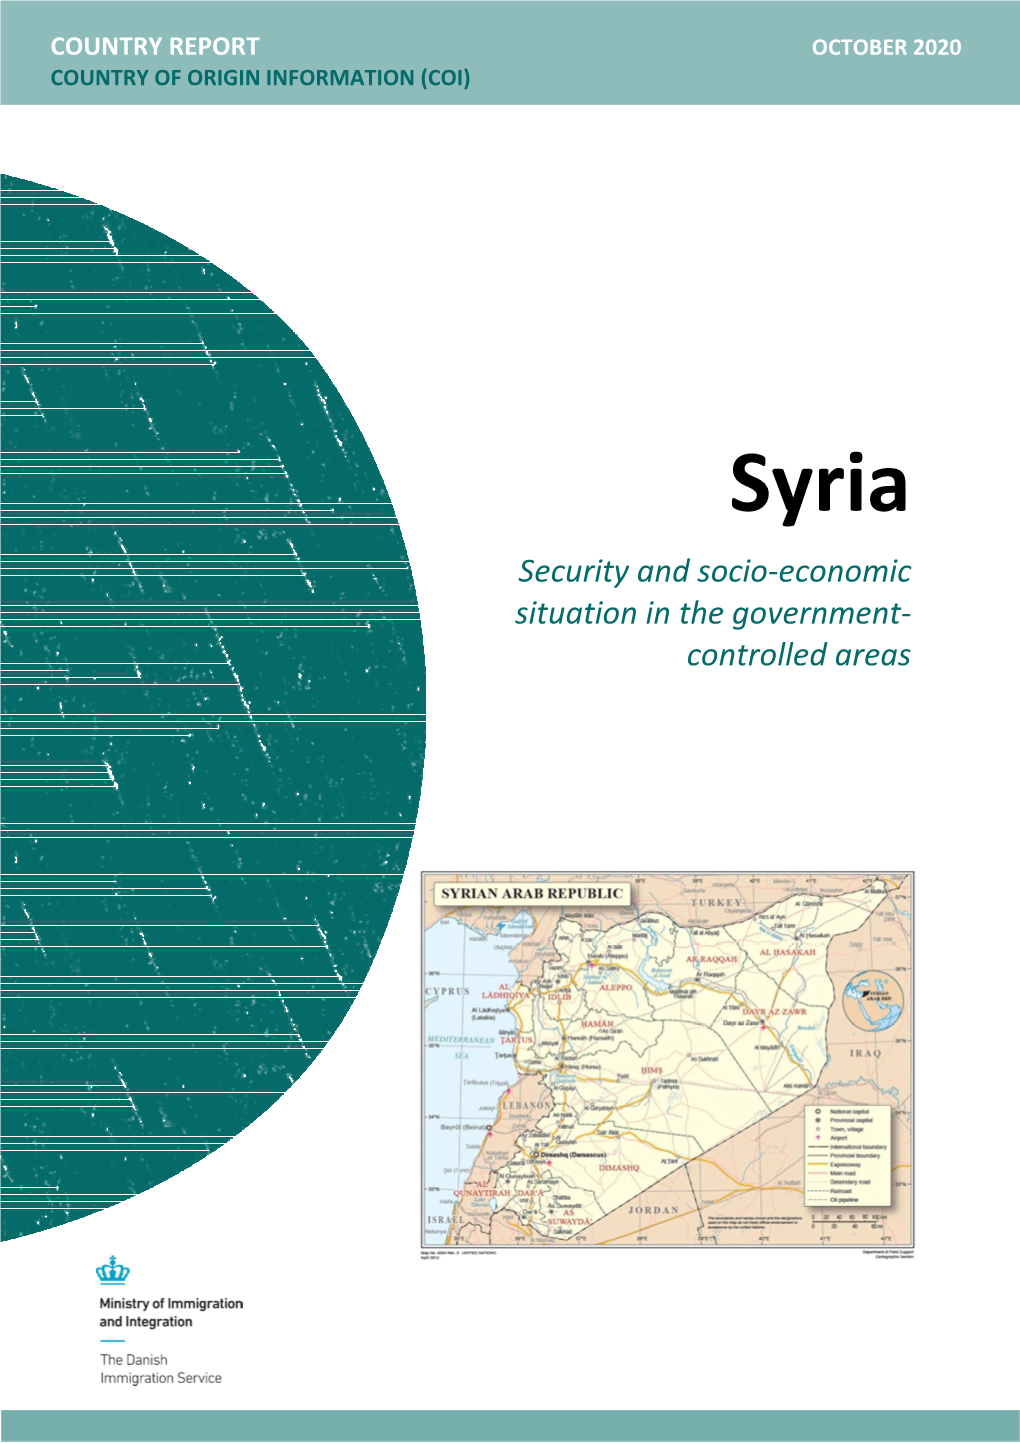 Syria: Security and Socio-Economic Situation in Government-Controlled